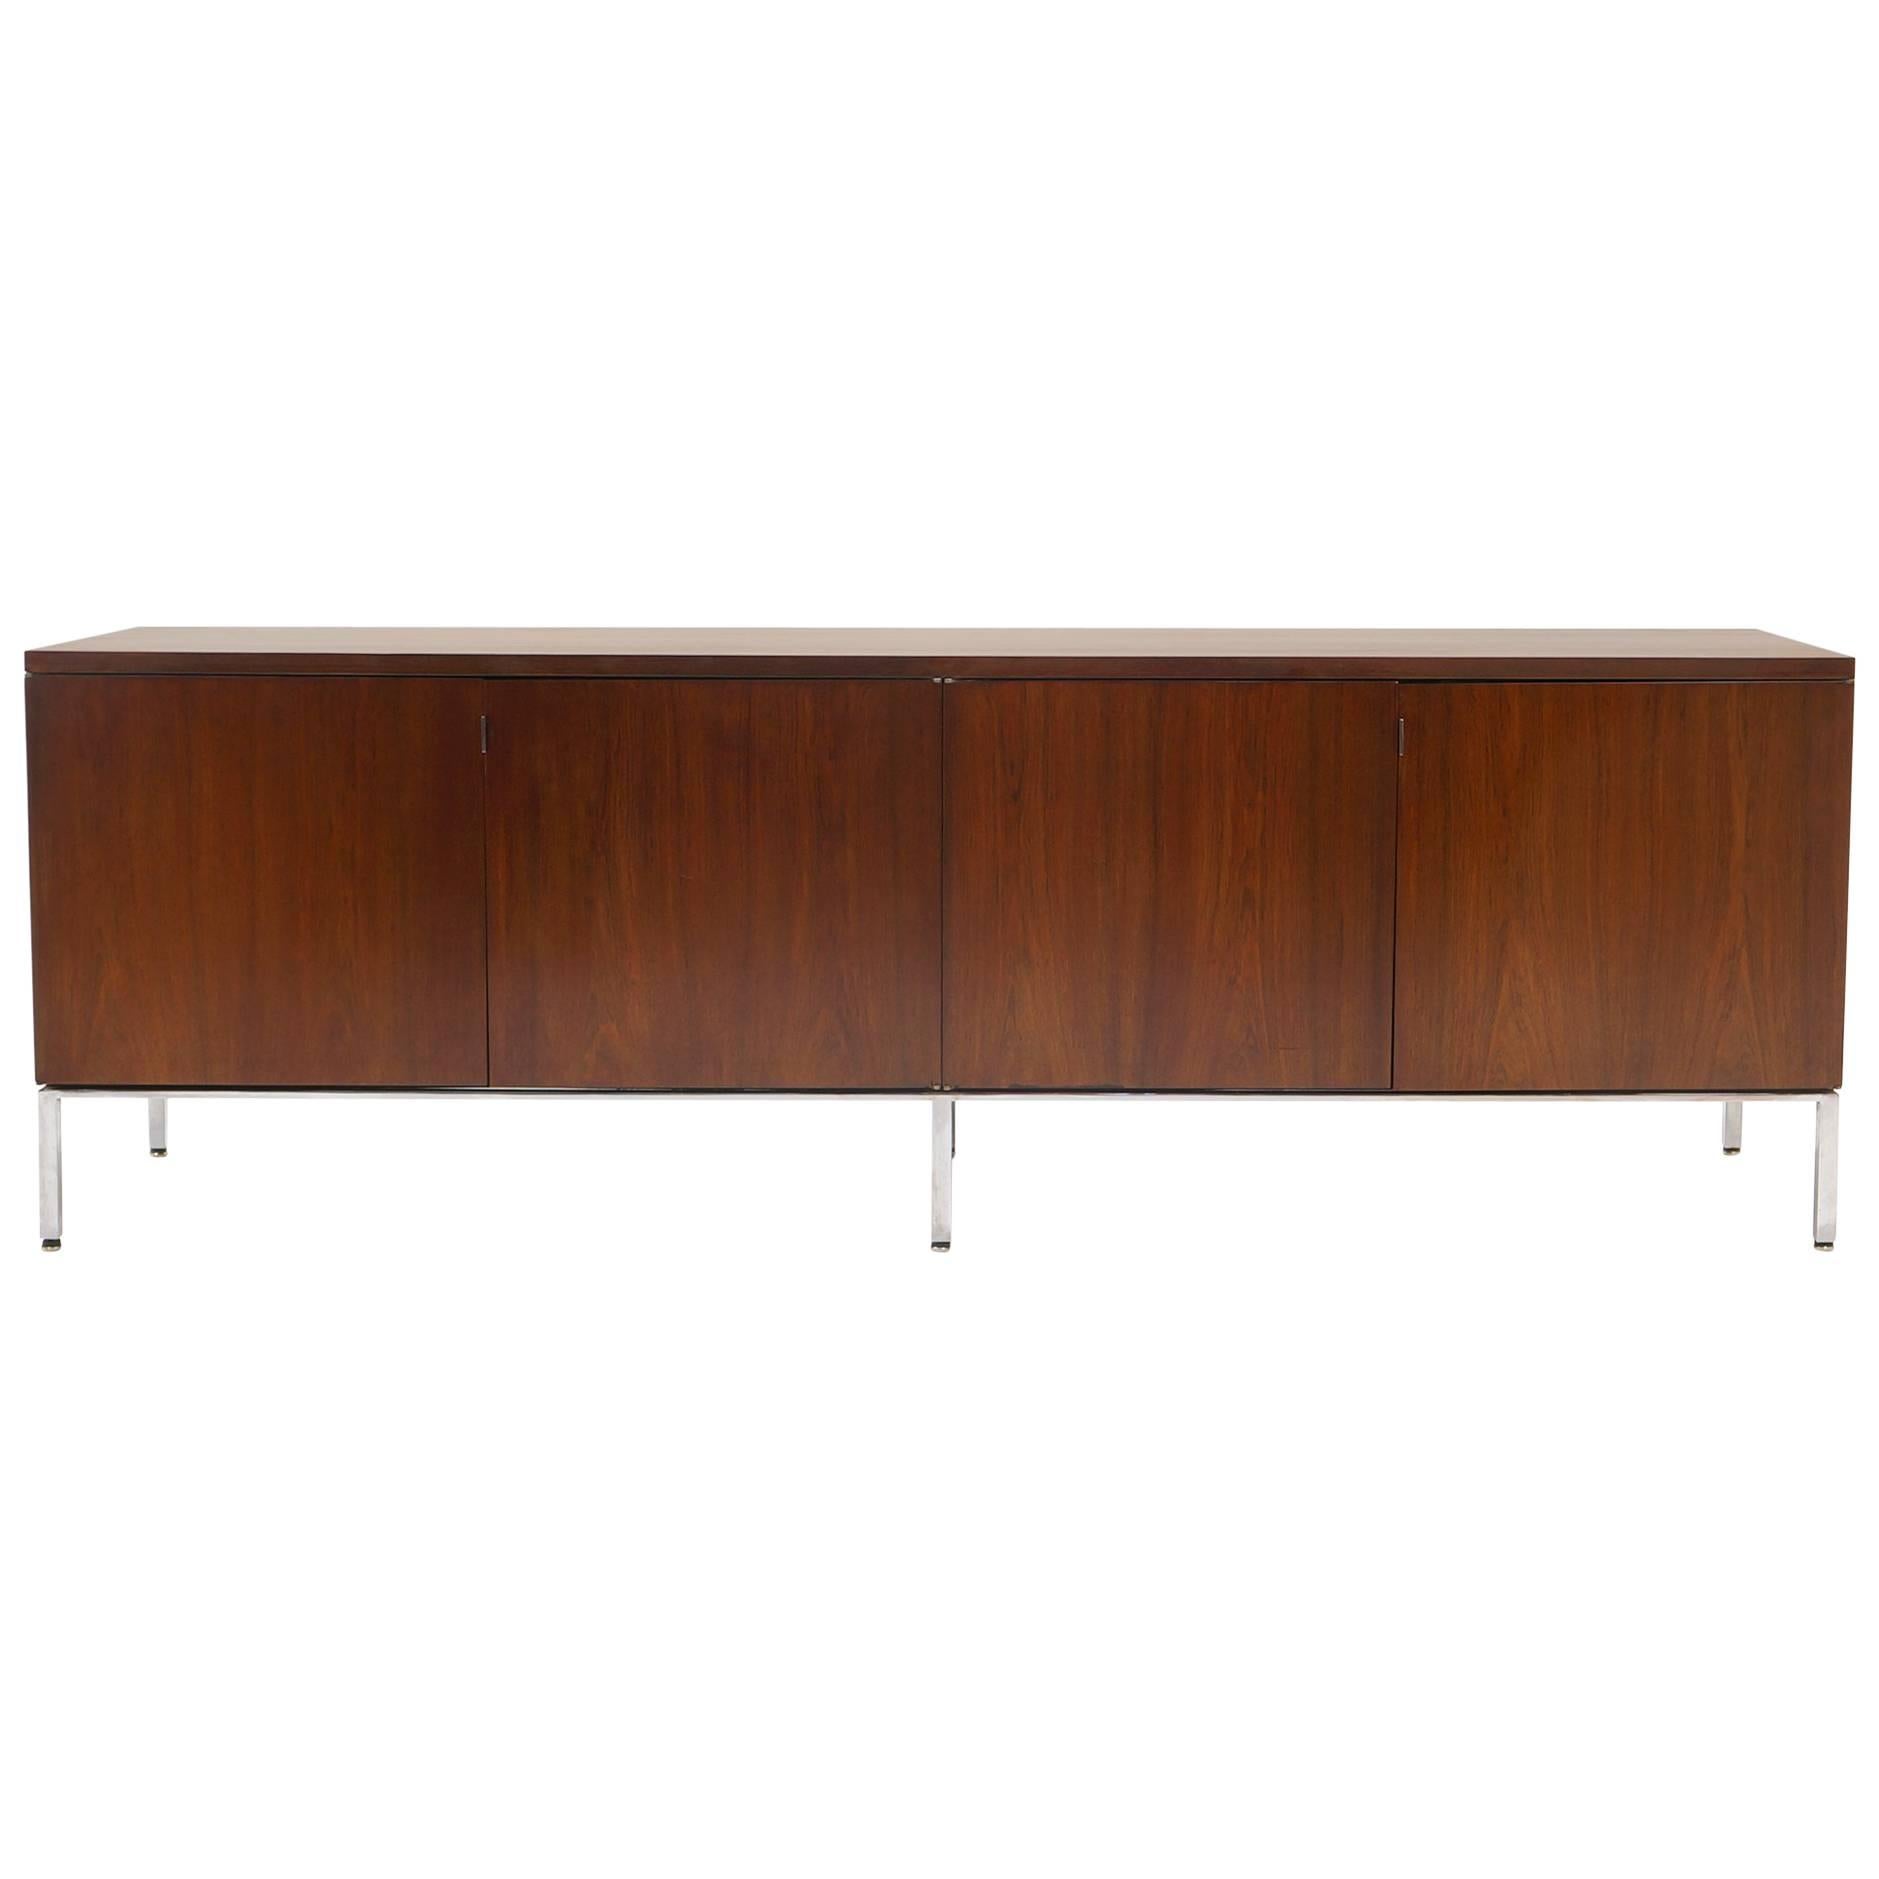 Rosewood Credenza/Media Cabinet Designed by Florence Knoll, Excellent